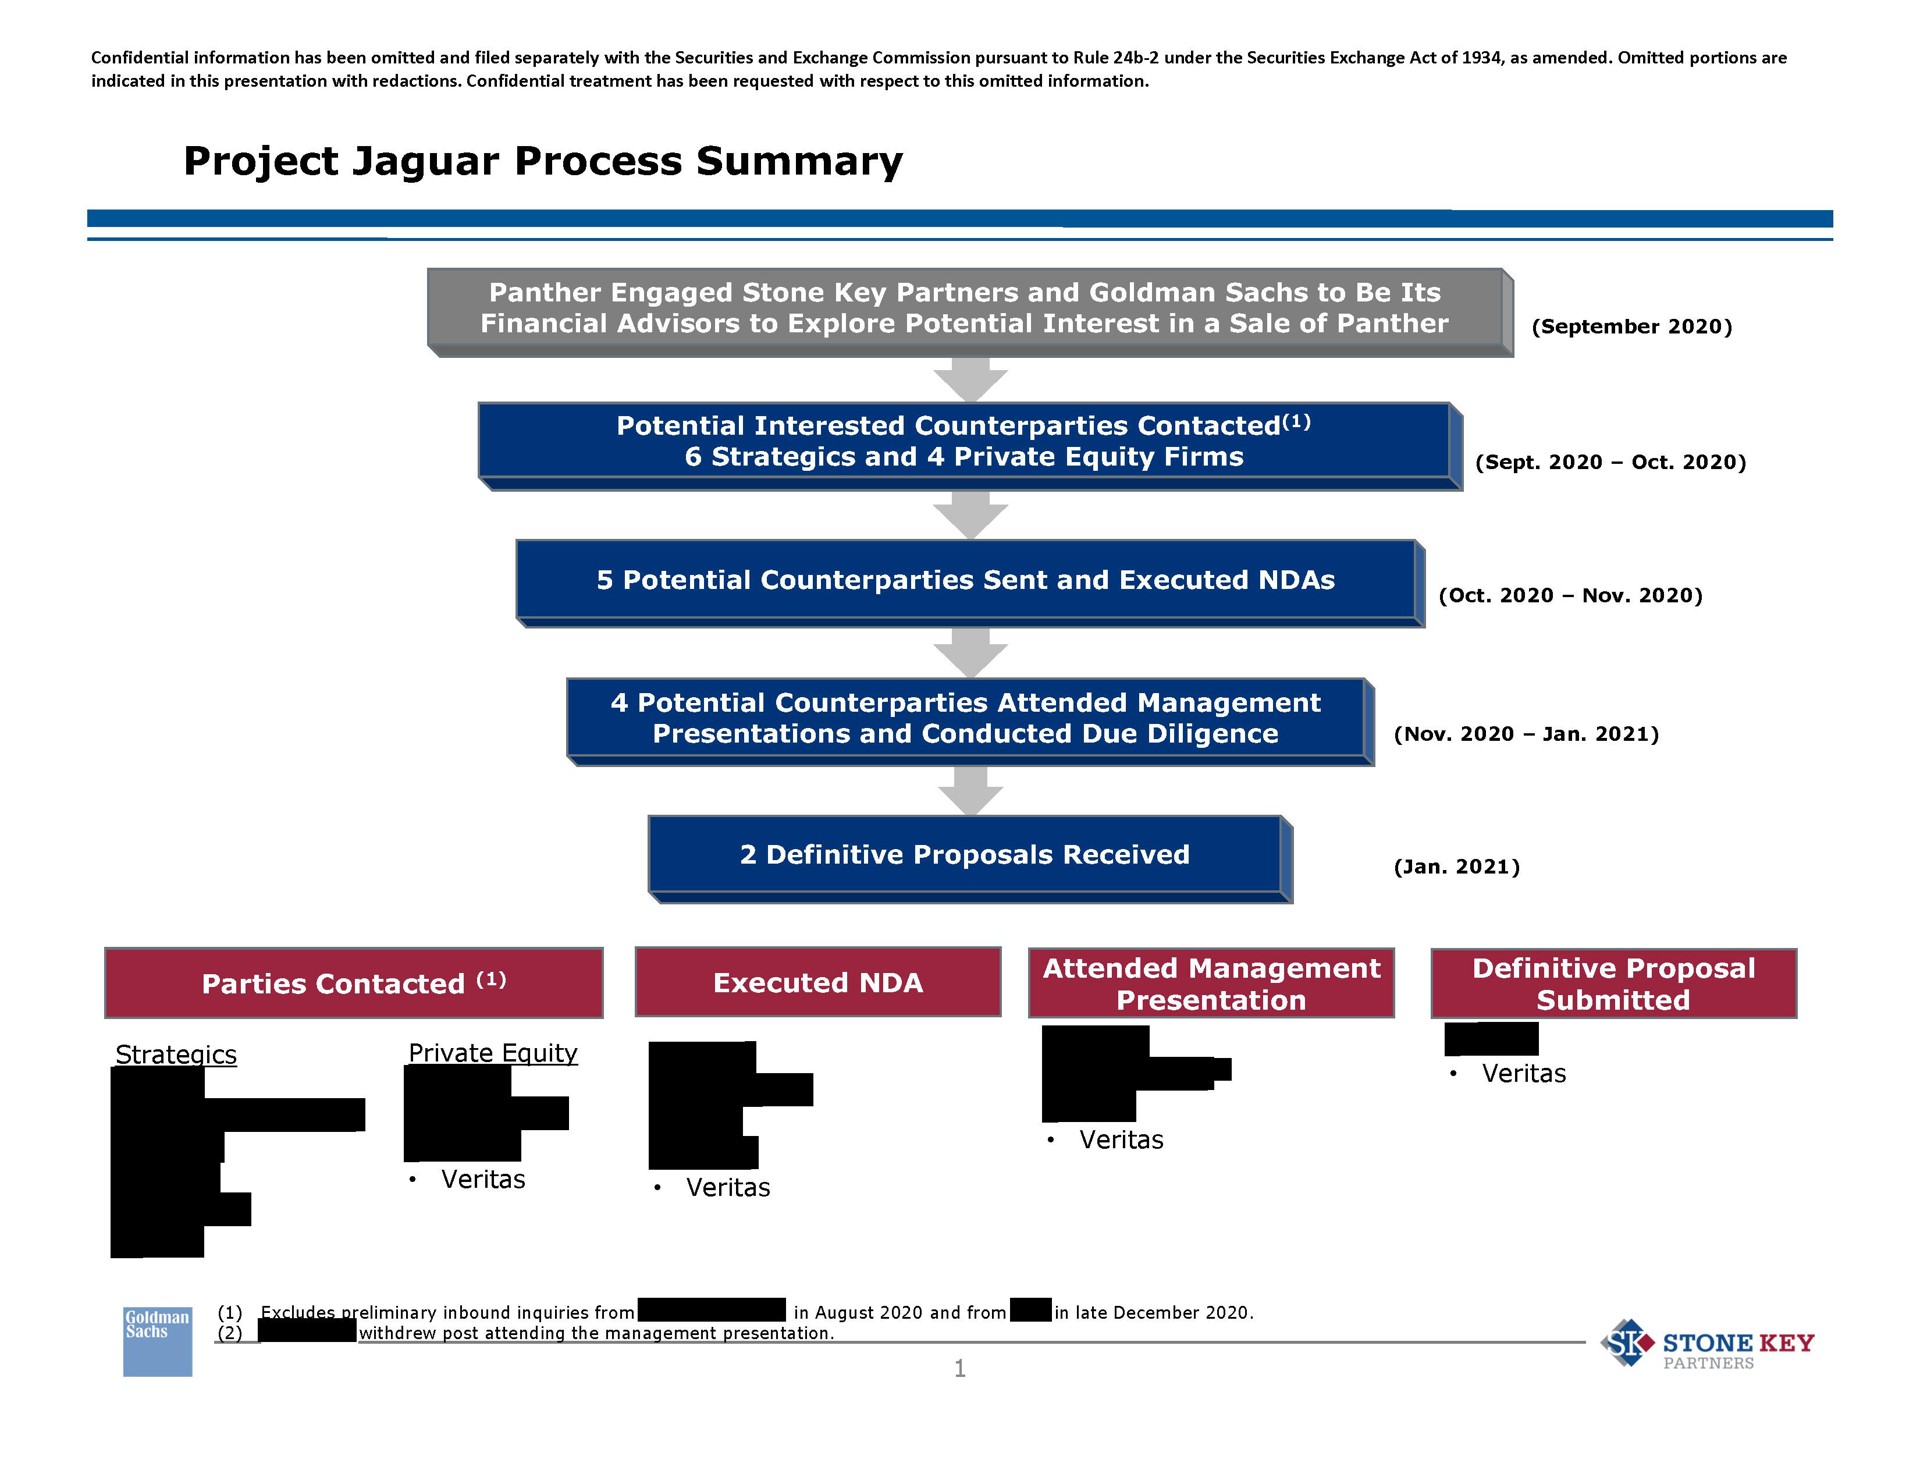 project jaguar process summary panther engaged stone key partners and to be its financial advisors to explore potential interest in a sale of panther potential interested contacted strategics and private equity firms sept potential sent and executed potential attended management presentations and conducted due diligence definitive proposals received executed do definitive proposal submitted a private parties contacted strategics partners | Goldman Sachs